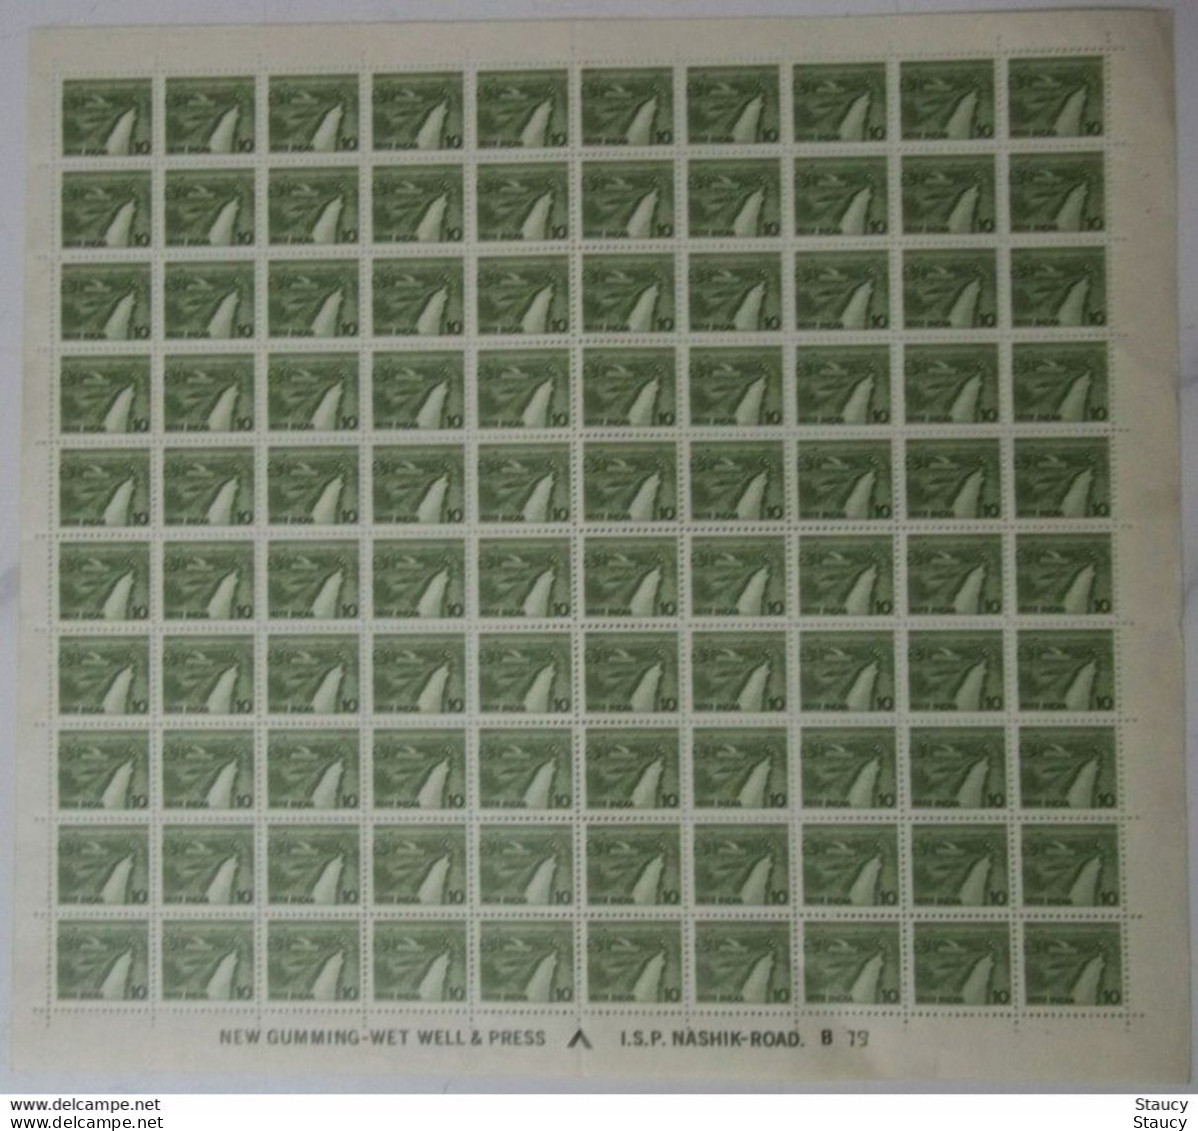 India 1981-1982 Definitive 6th Series Minor Irrigation 10p (Full Sheet) – 100 Stamps MNH - Blocs-feuillets